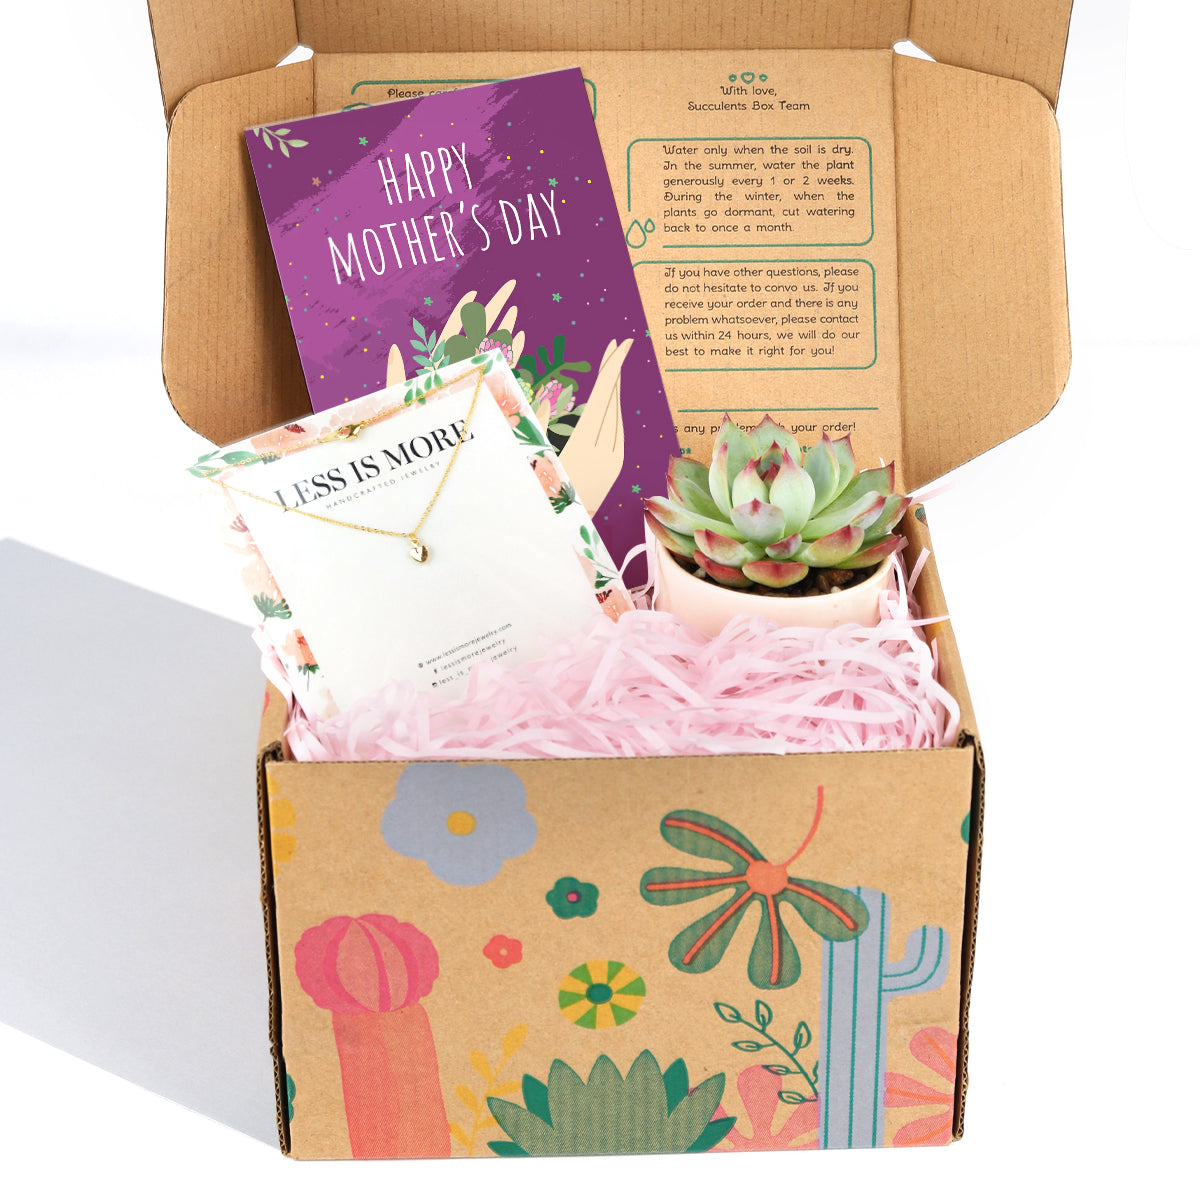 mother's day gift box, gift box ideas for mother's day, succulents gift box, gift box with jewelry for mom, gift box with greeting card, cute gift box for mother's day, happy mother's day gift box